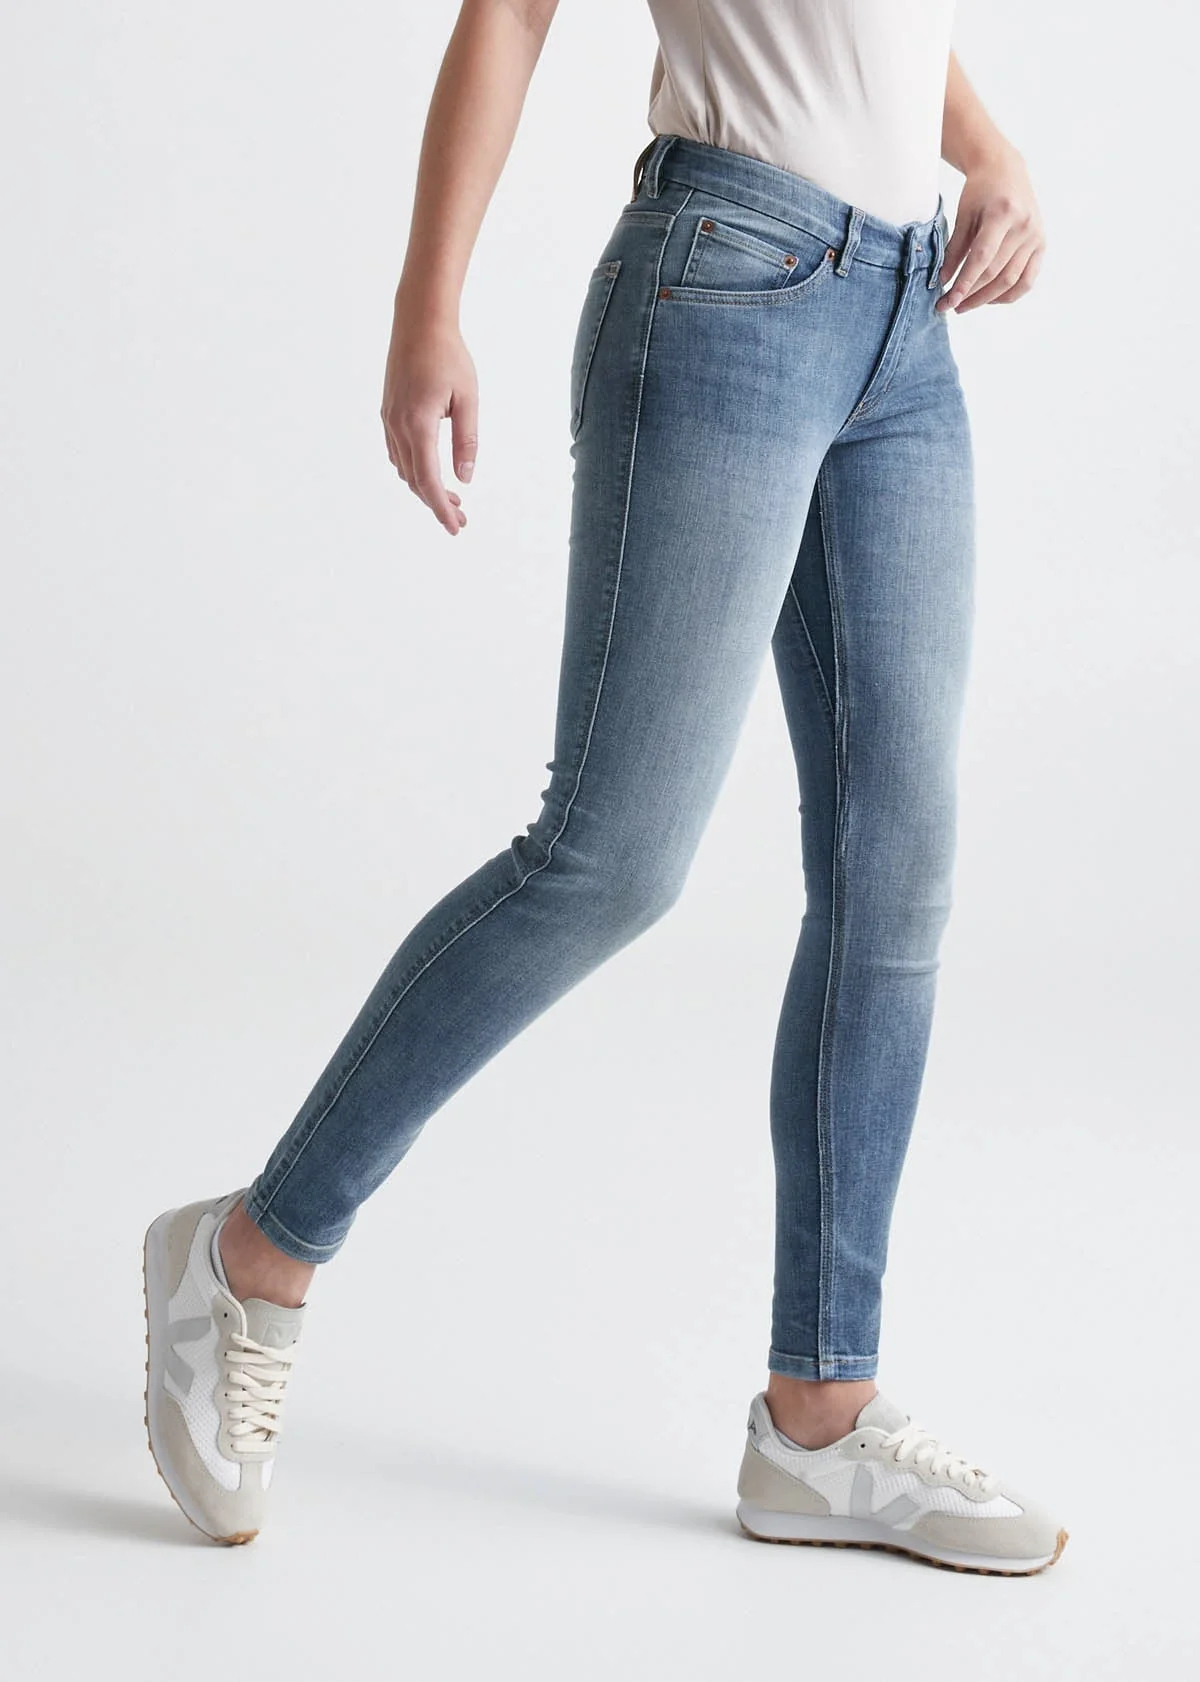 Stretch denim jeans have become a wardrobe staple for their comfort, versatility, and timeless appeal. Whether you're aiming